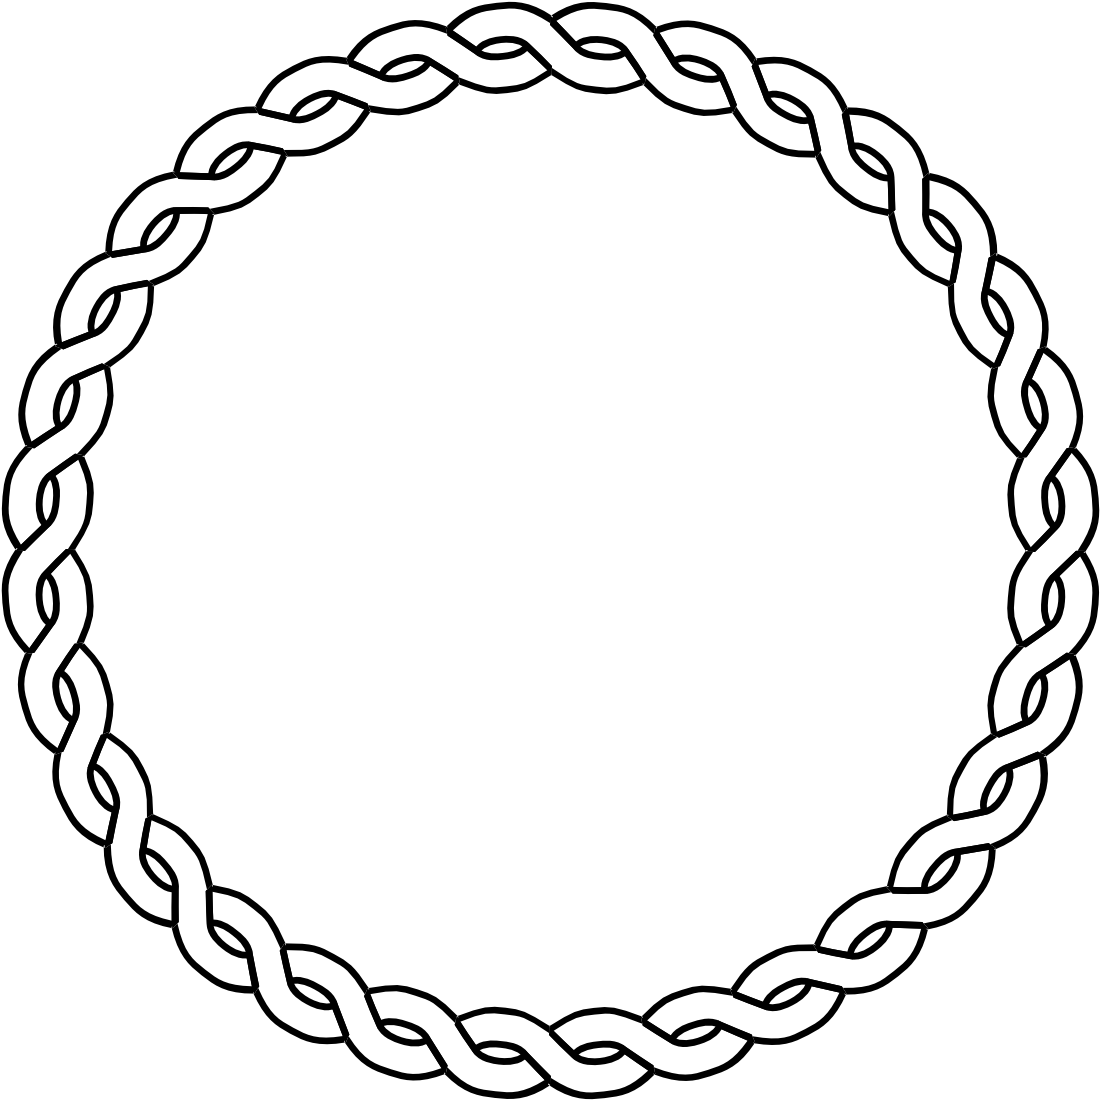 For Developers Black Circle Designs Clipart - Cool Circle Border (1000x1000)